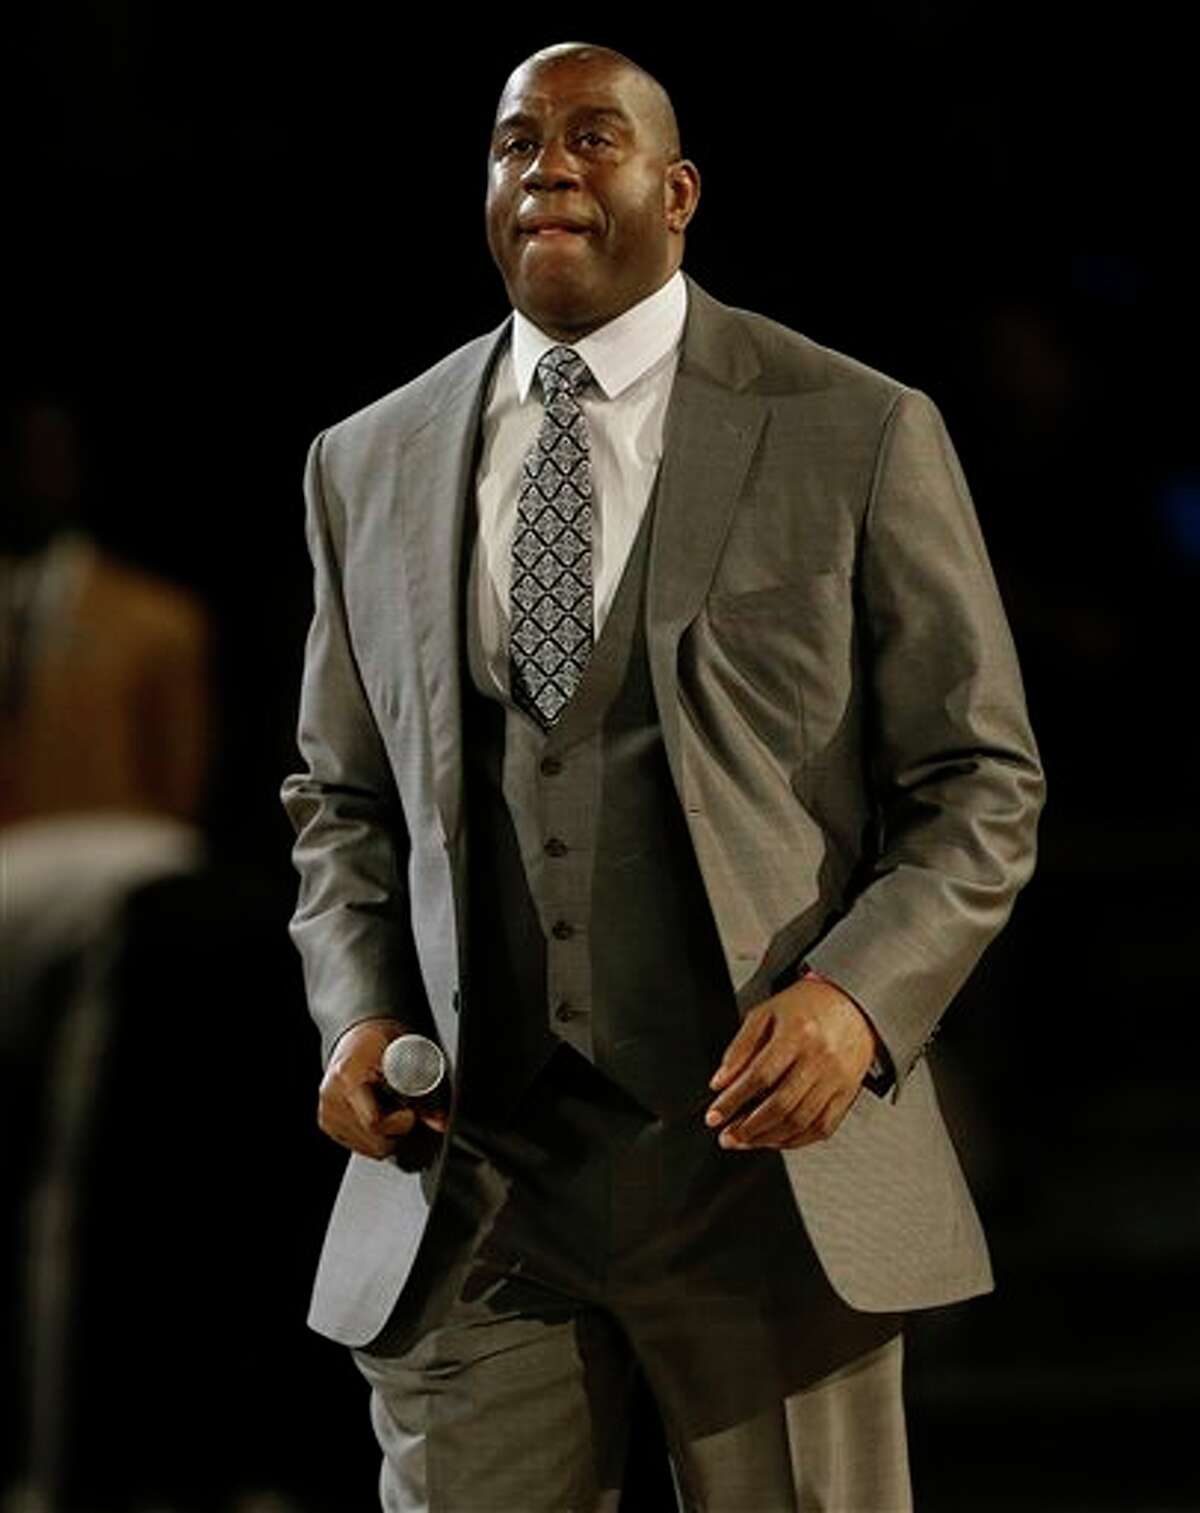 Former NBA player Earvin "Magic" Johnson, Jr. walks on the court during the NBA All Star basketball game, Sunday, Feb. 16, 2014, in New Orleans. (AP Photo/Gerald Herbert)